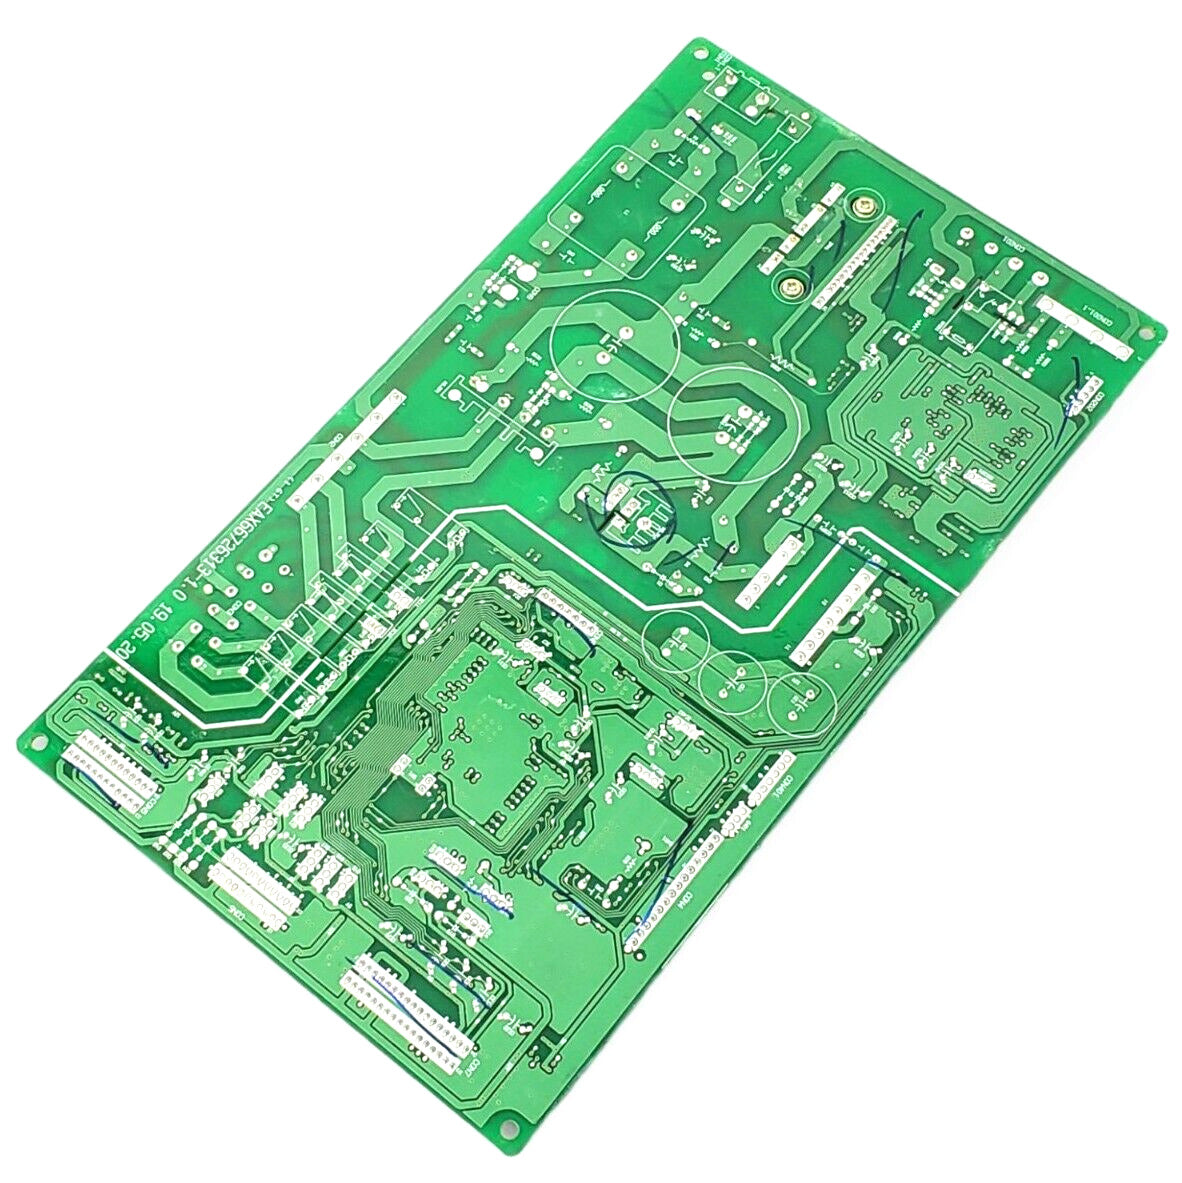 OEM Replacement for LG Refrigerator Control EBR81182790